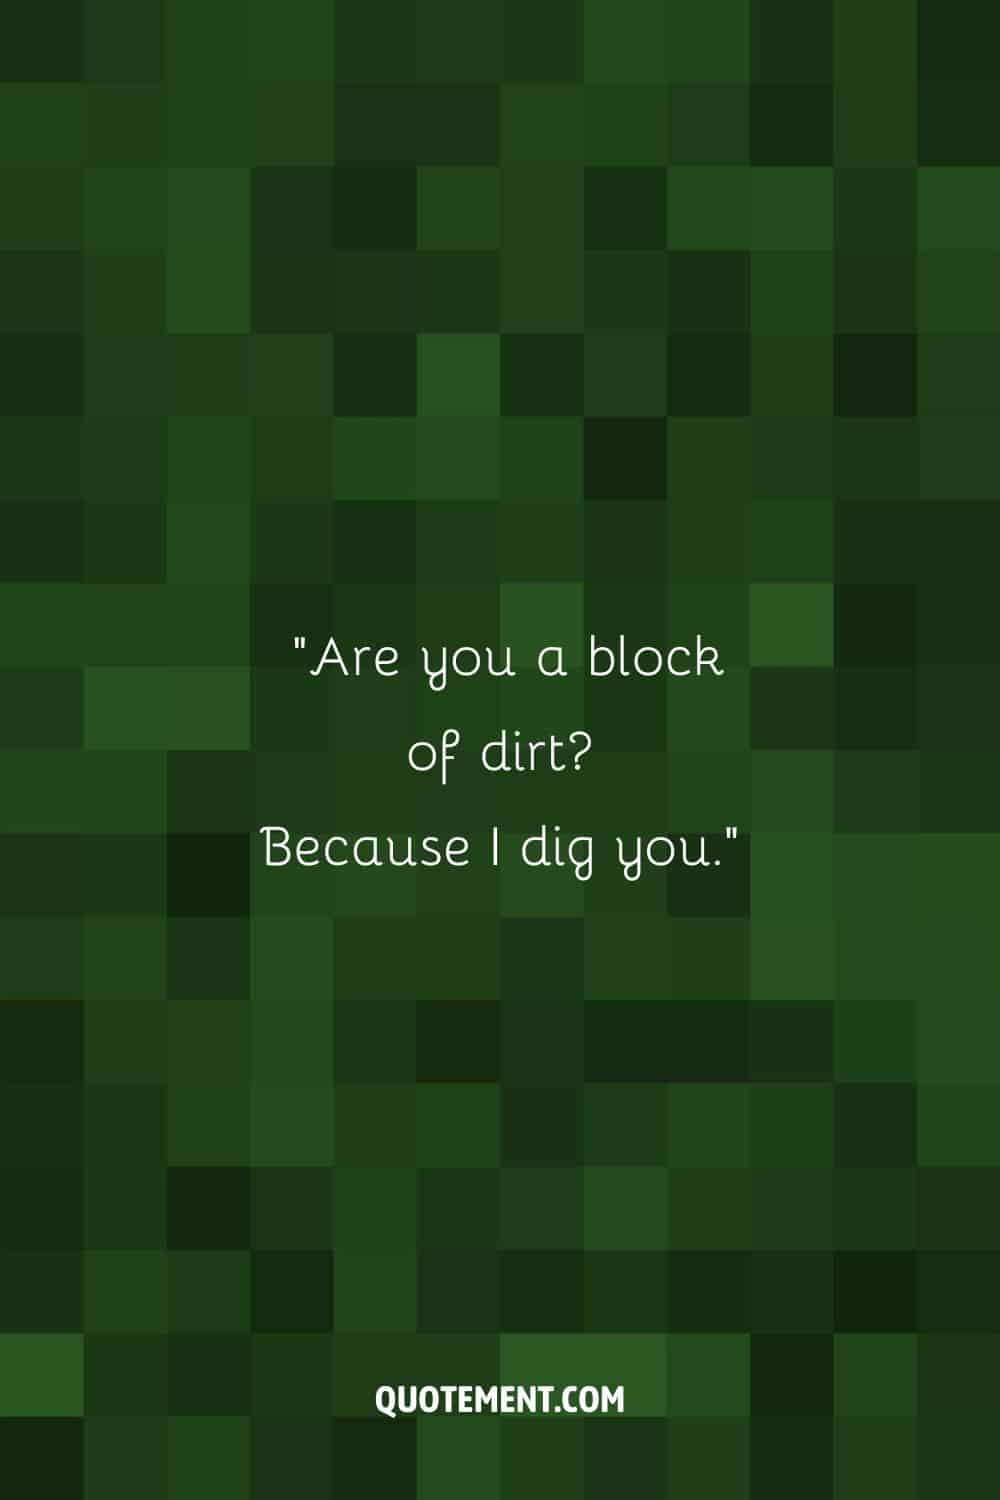 Are you a block of dirt Because I dig you.”